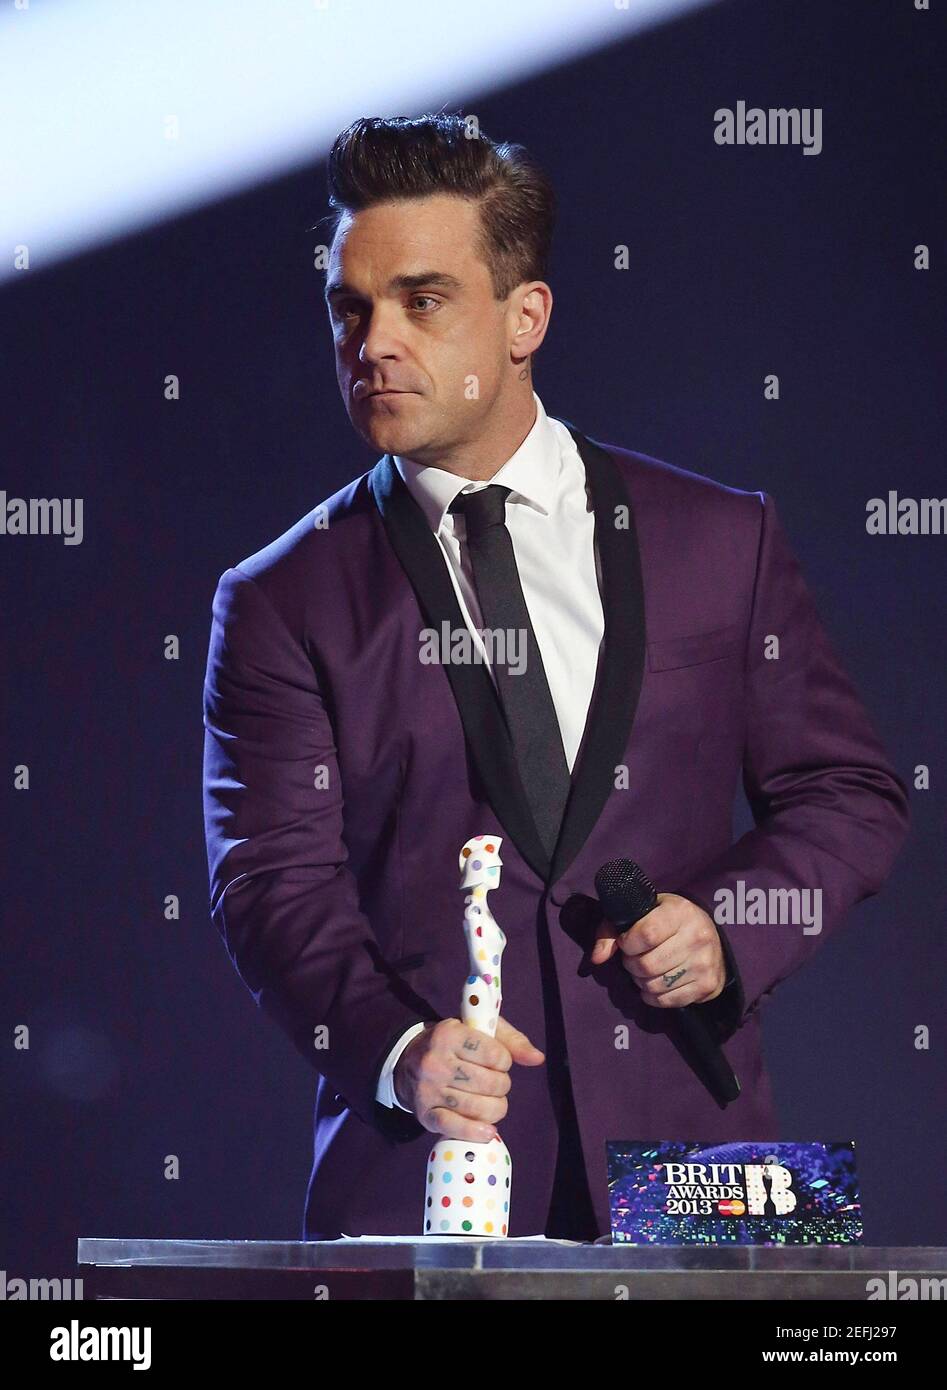 London, UK.  20th February 2013. Robbie Williams presents Award to One Direction at the 2013 Brit Awards Show, 02 Arena, London. Stock Photo